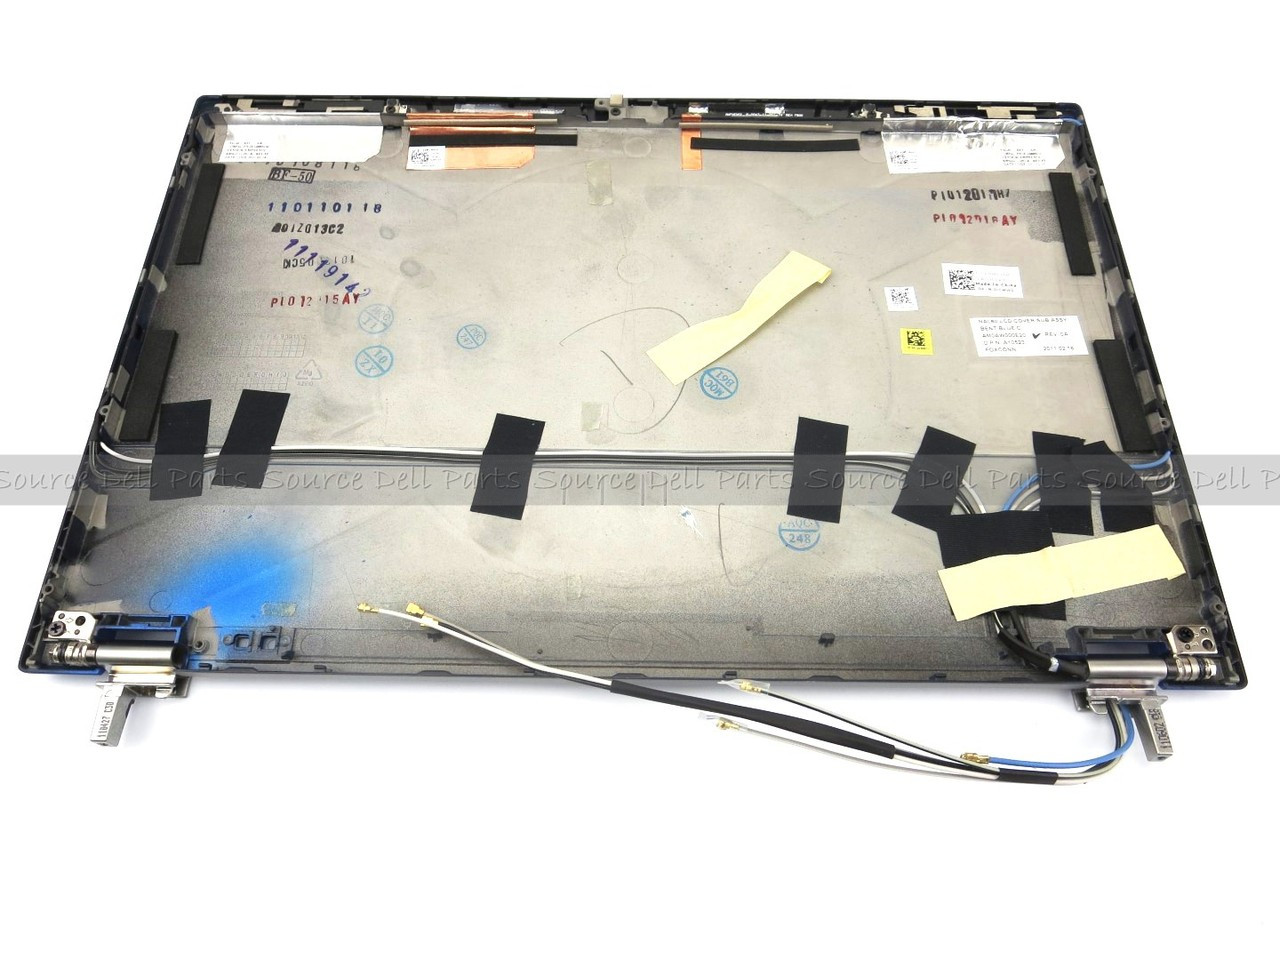 Dell Latitude E4310 Blue LCD Back Cover Lid Assembly with Hinges - JCHW0